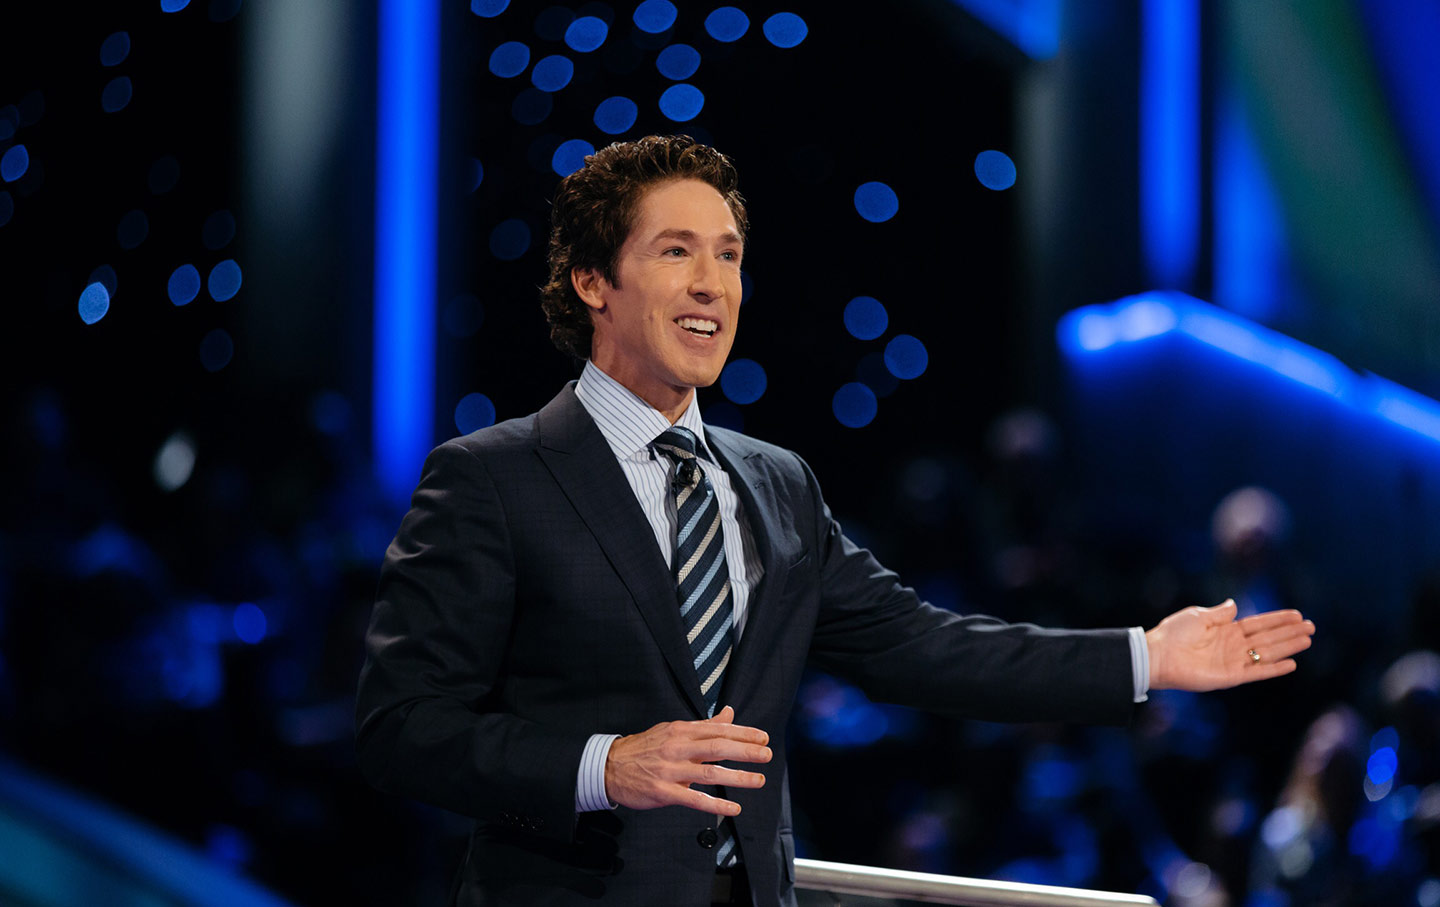 Joel Osteen Says He Won't Focus on 'All That Negative Energy'